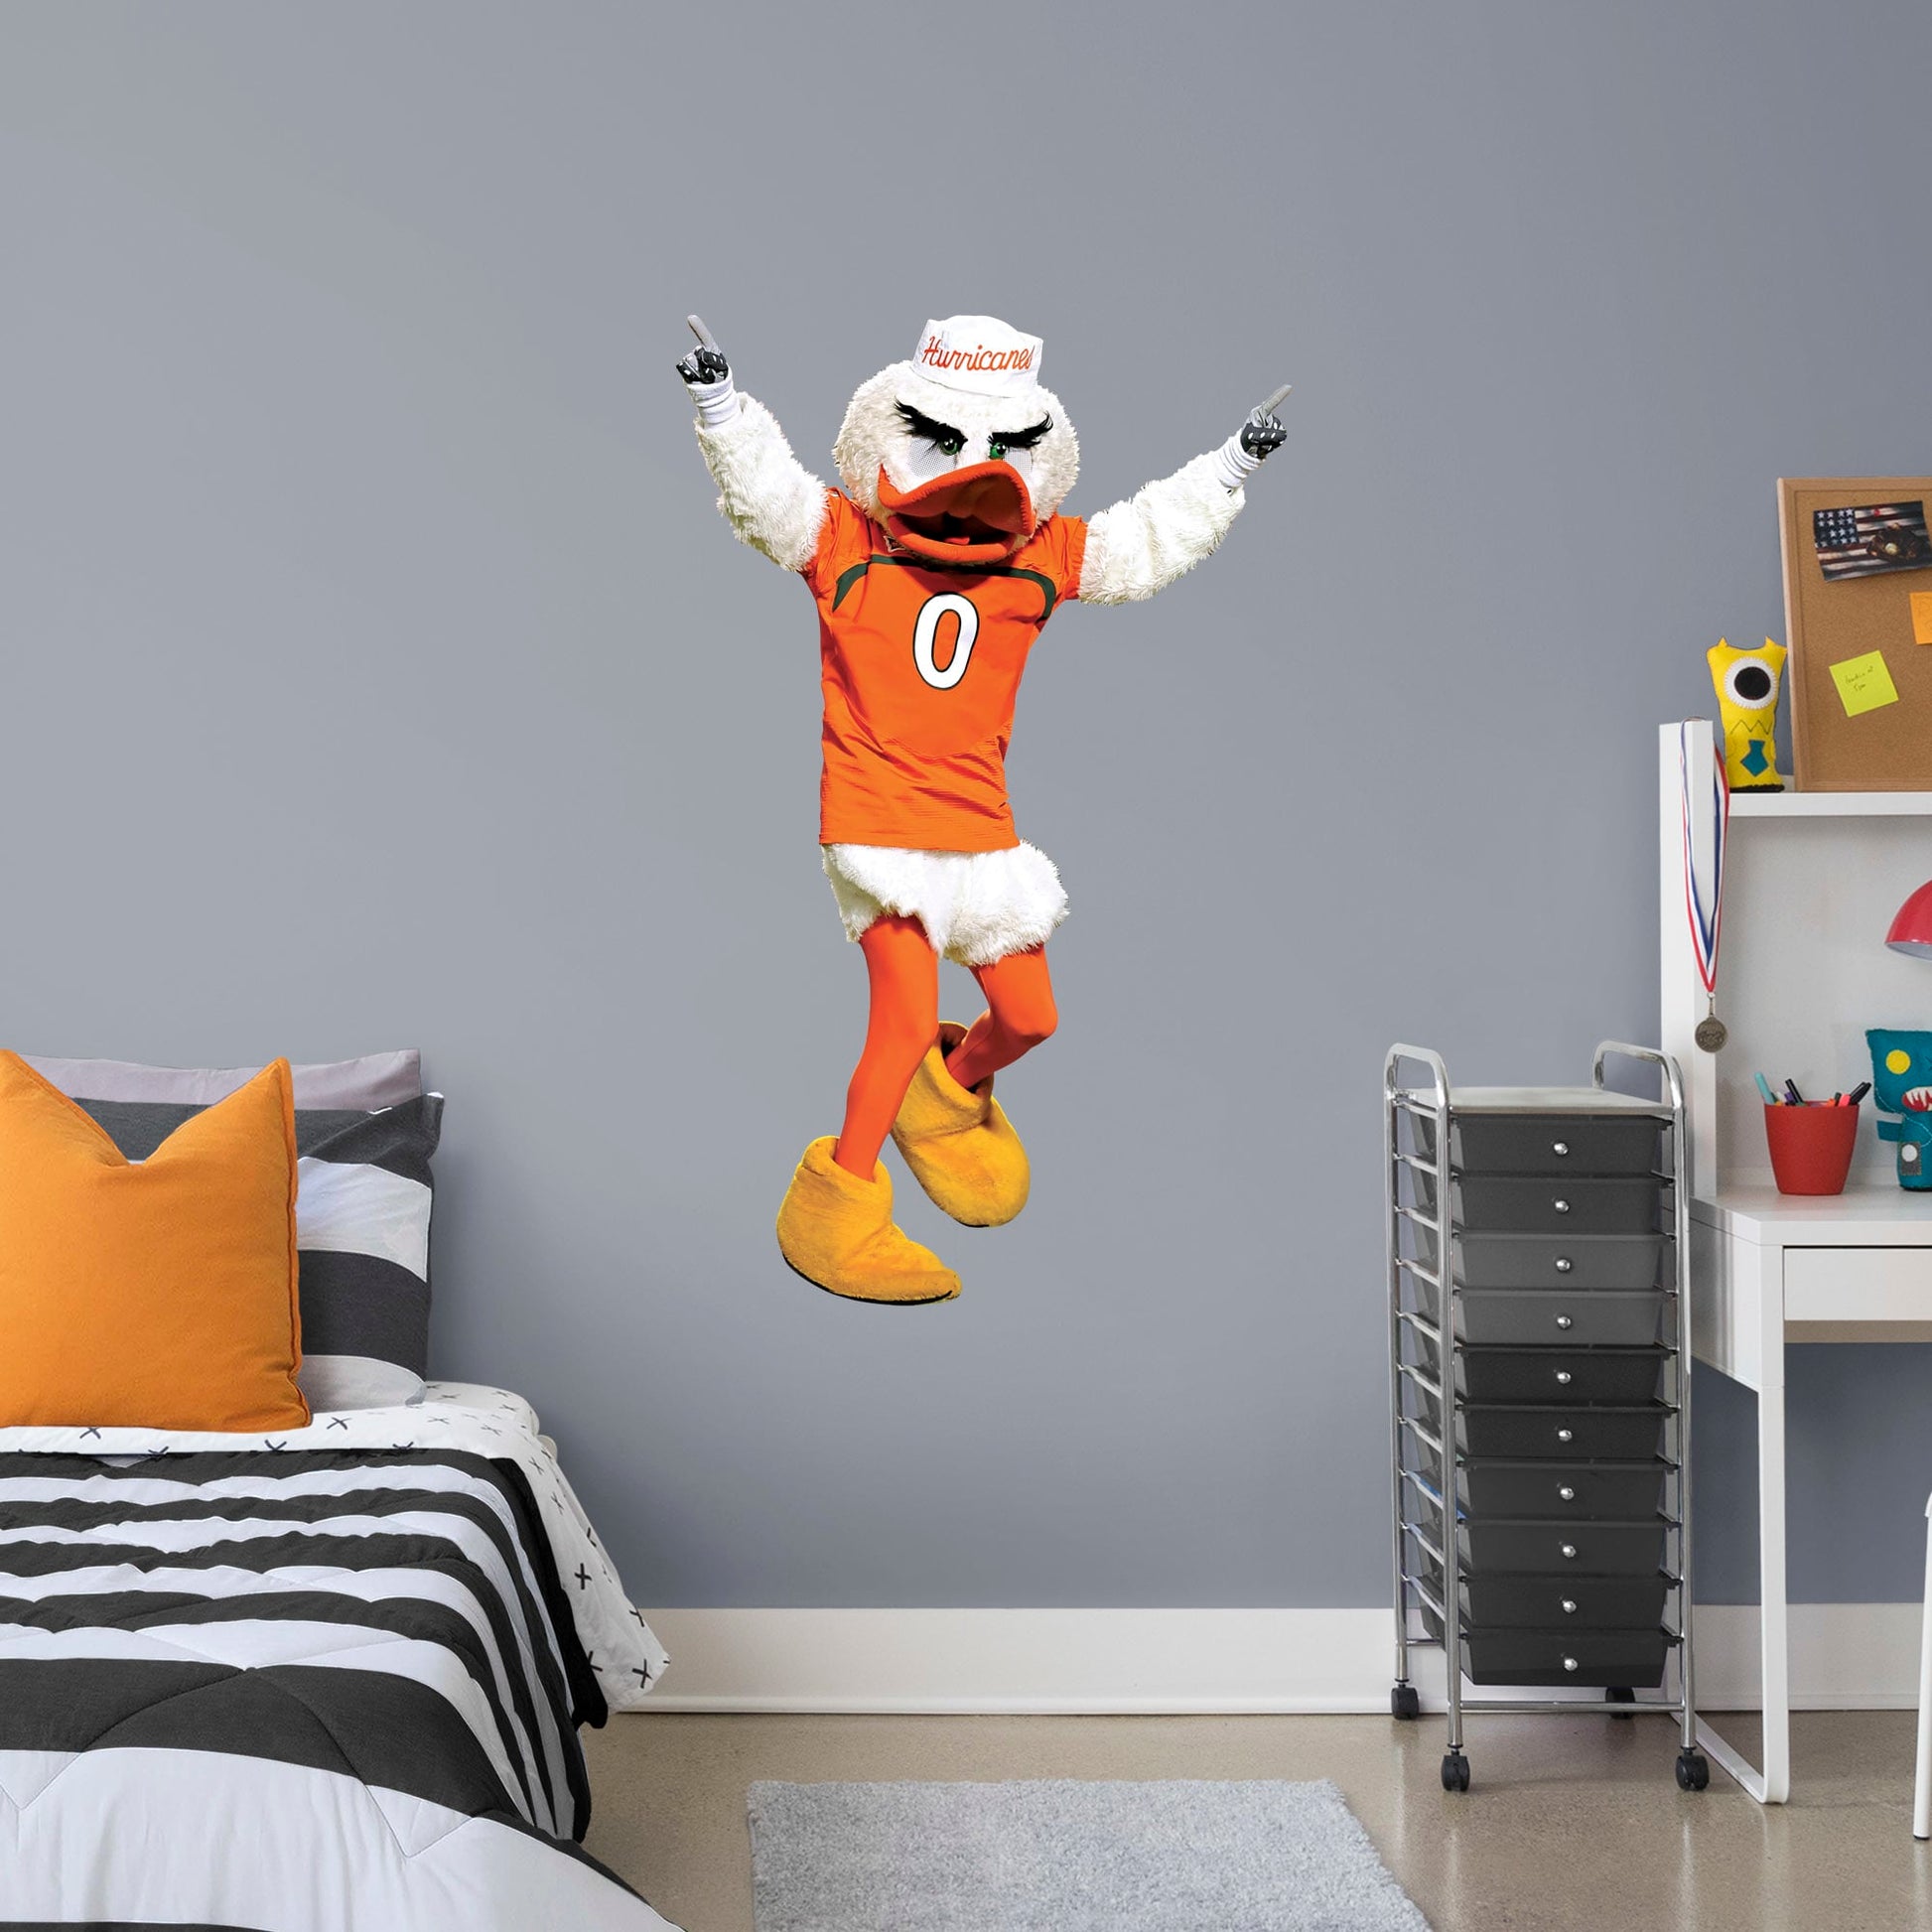 Giant Mascot + 2 Decals (32"W x 51"H)